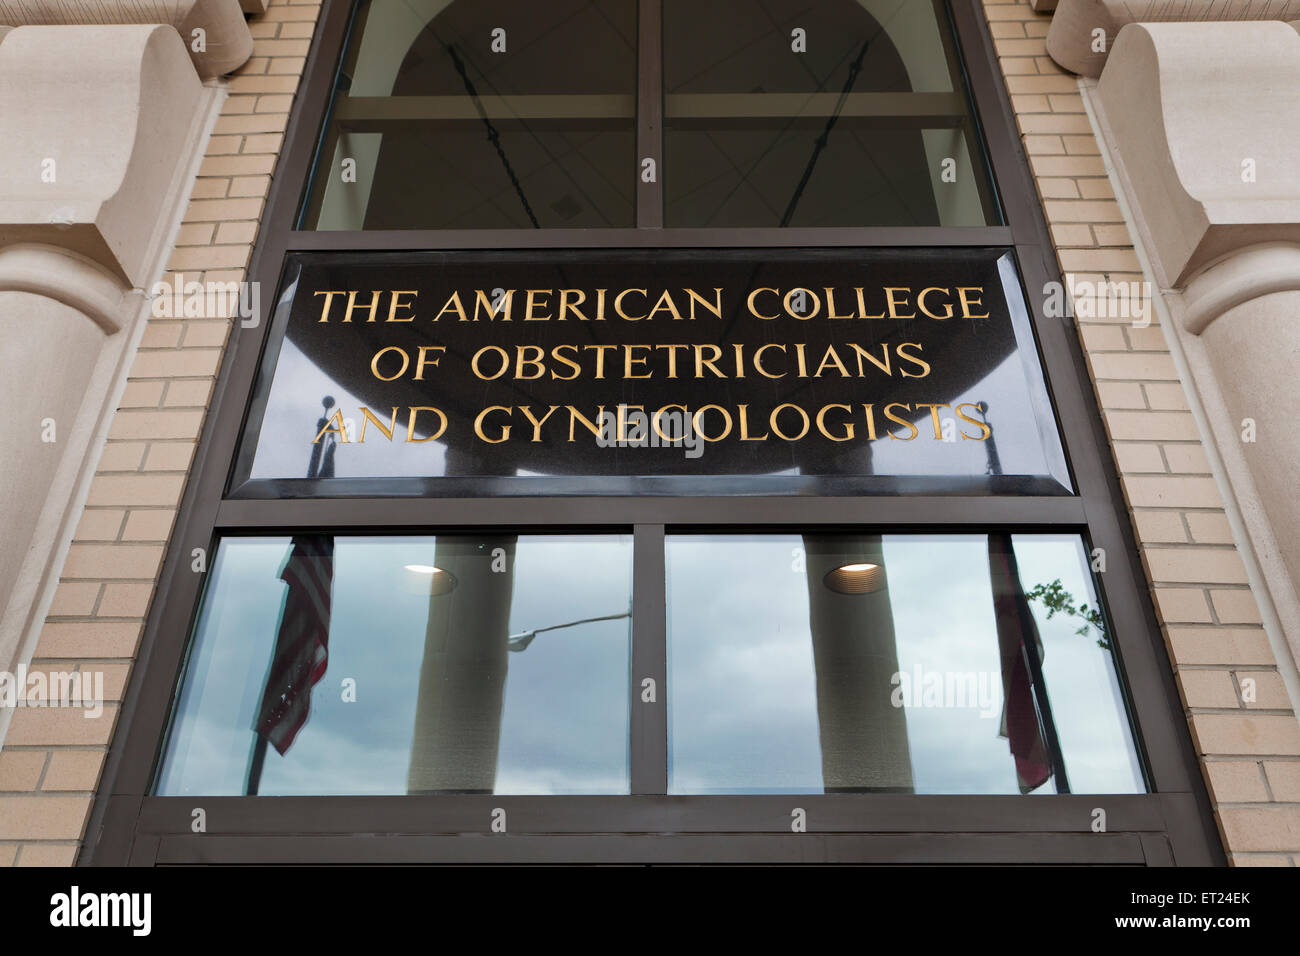 American College of Obstetricians and Gynecologists - Washington, DC USA Stock Photo